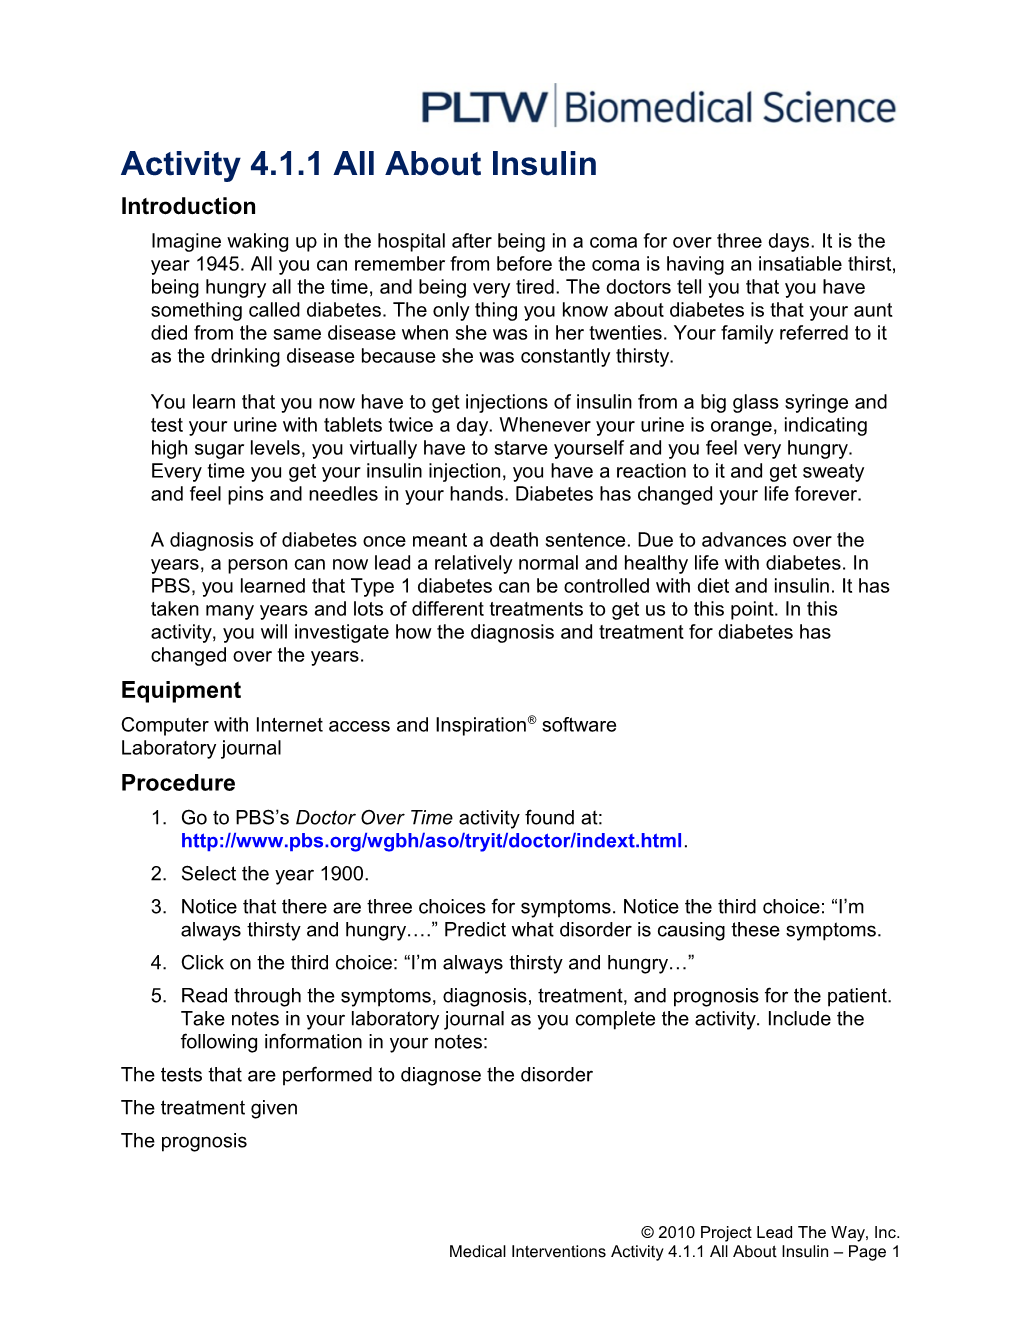 Activity 4.1.1 All About Insulin